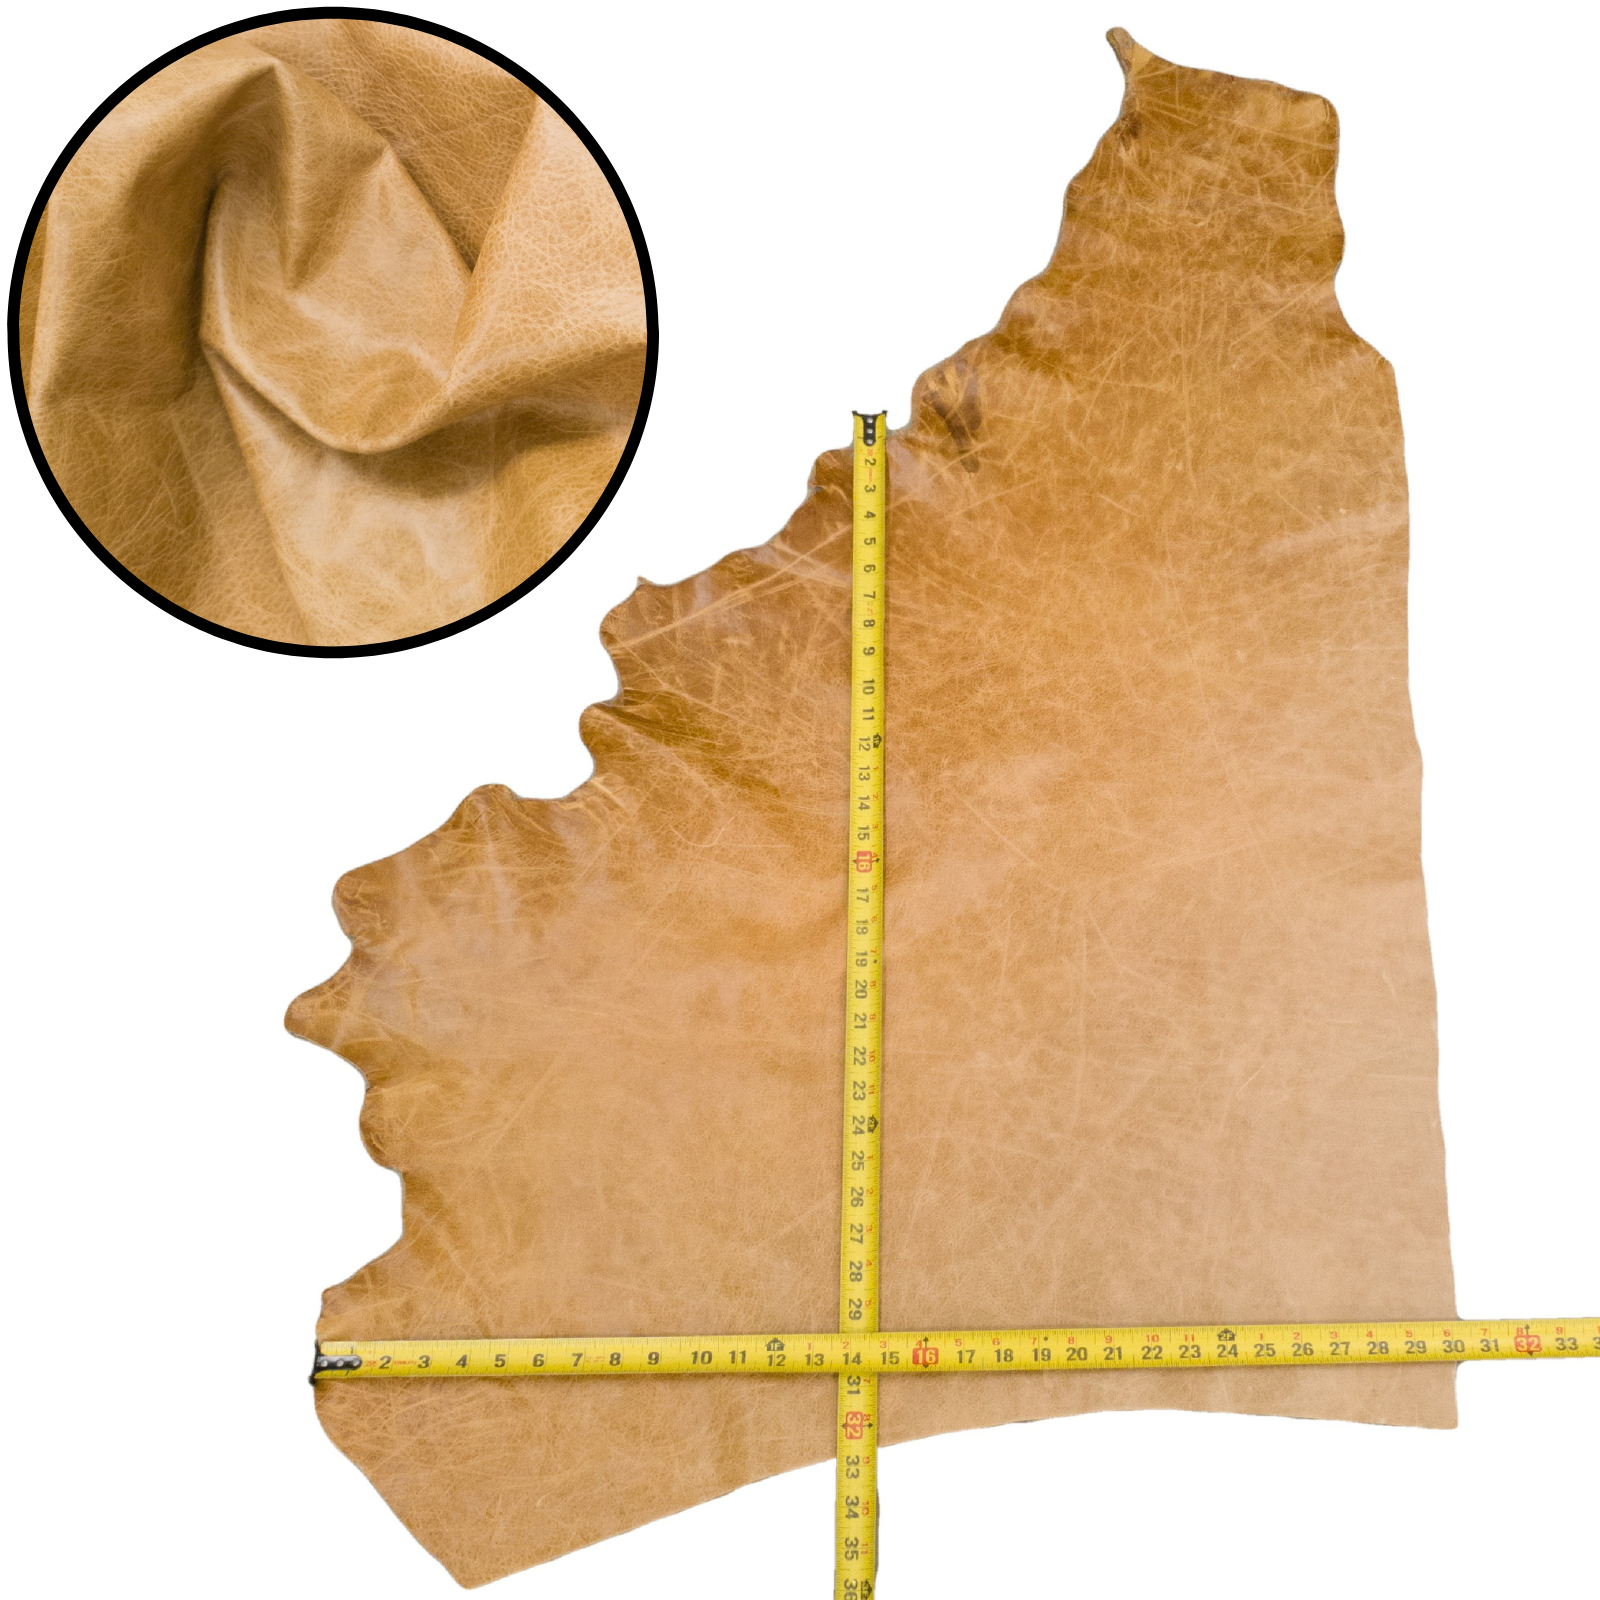 Light Browns, 4-20 Sq Ft Upholstery Cowhide Project Pieces, Beach Sand / 6 / 4 | The Leather Guy